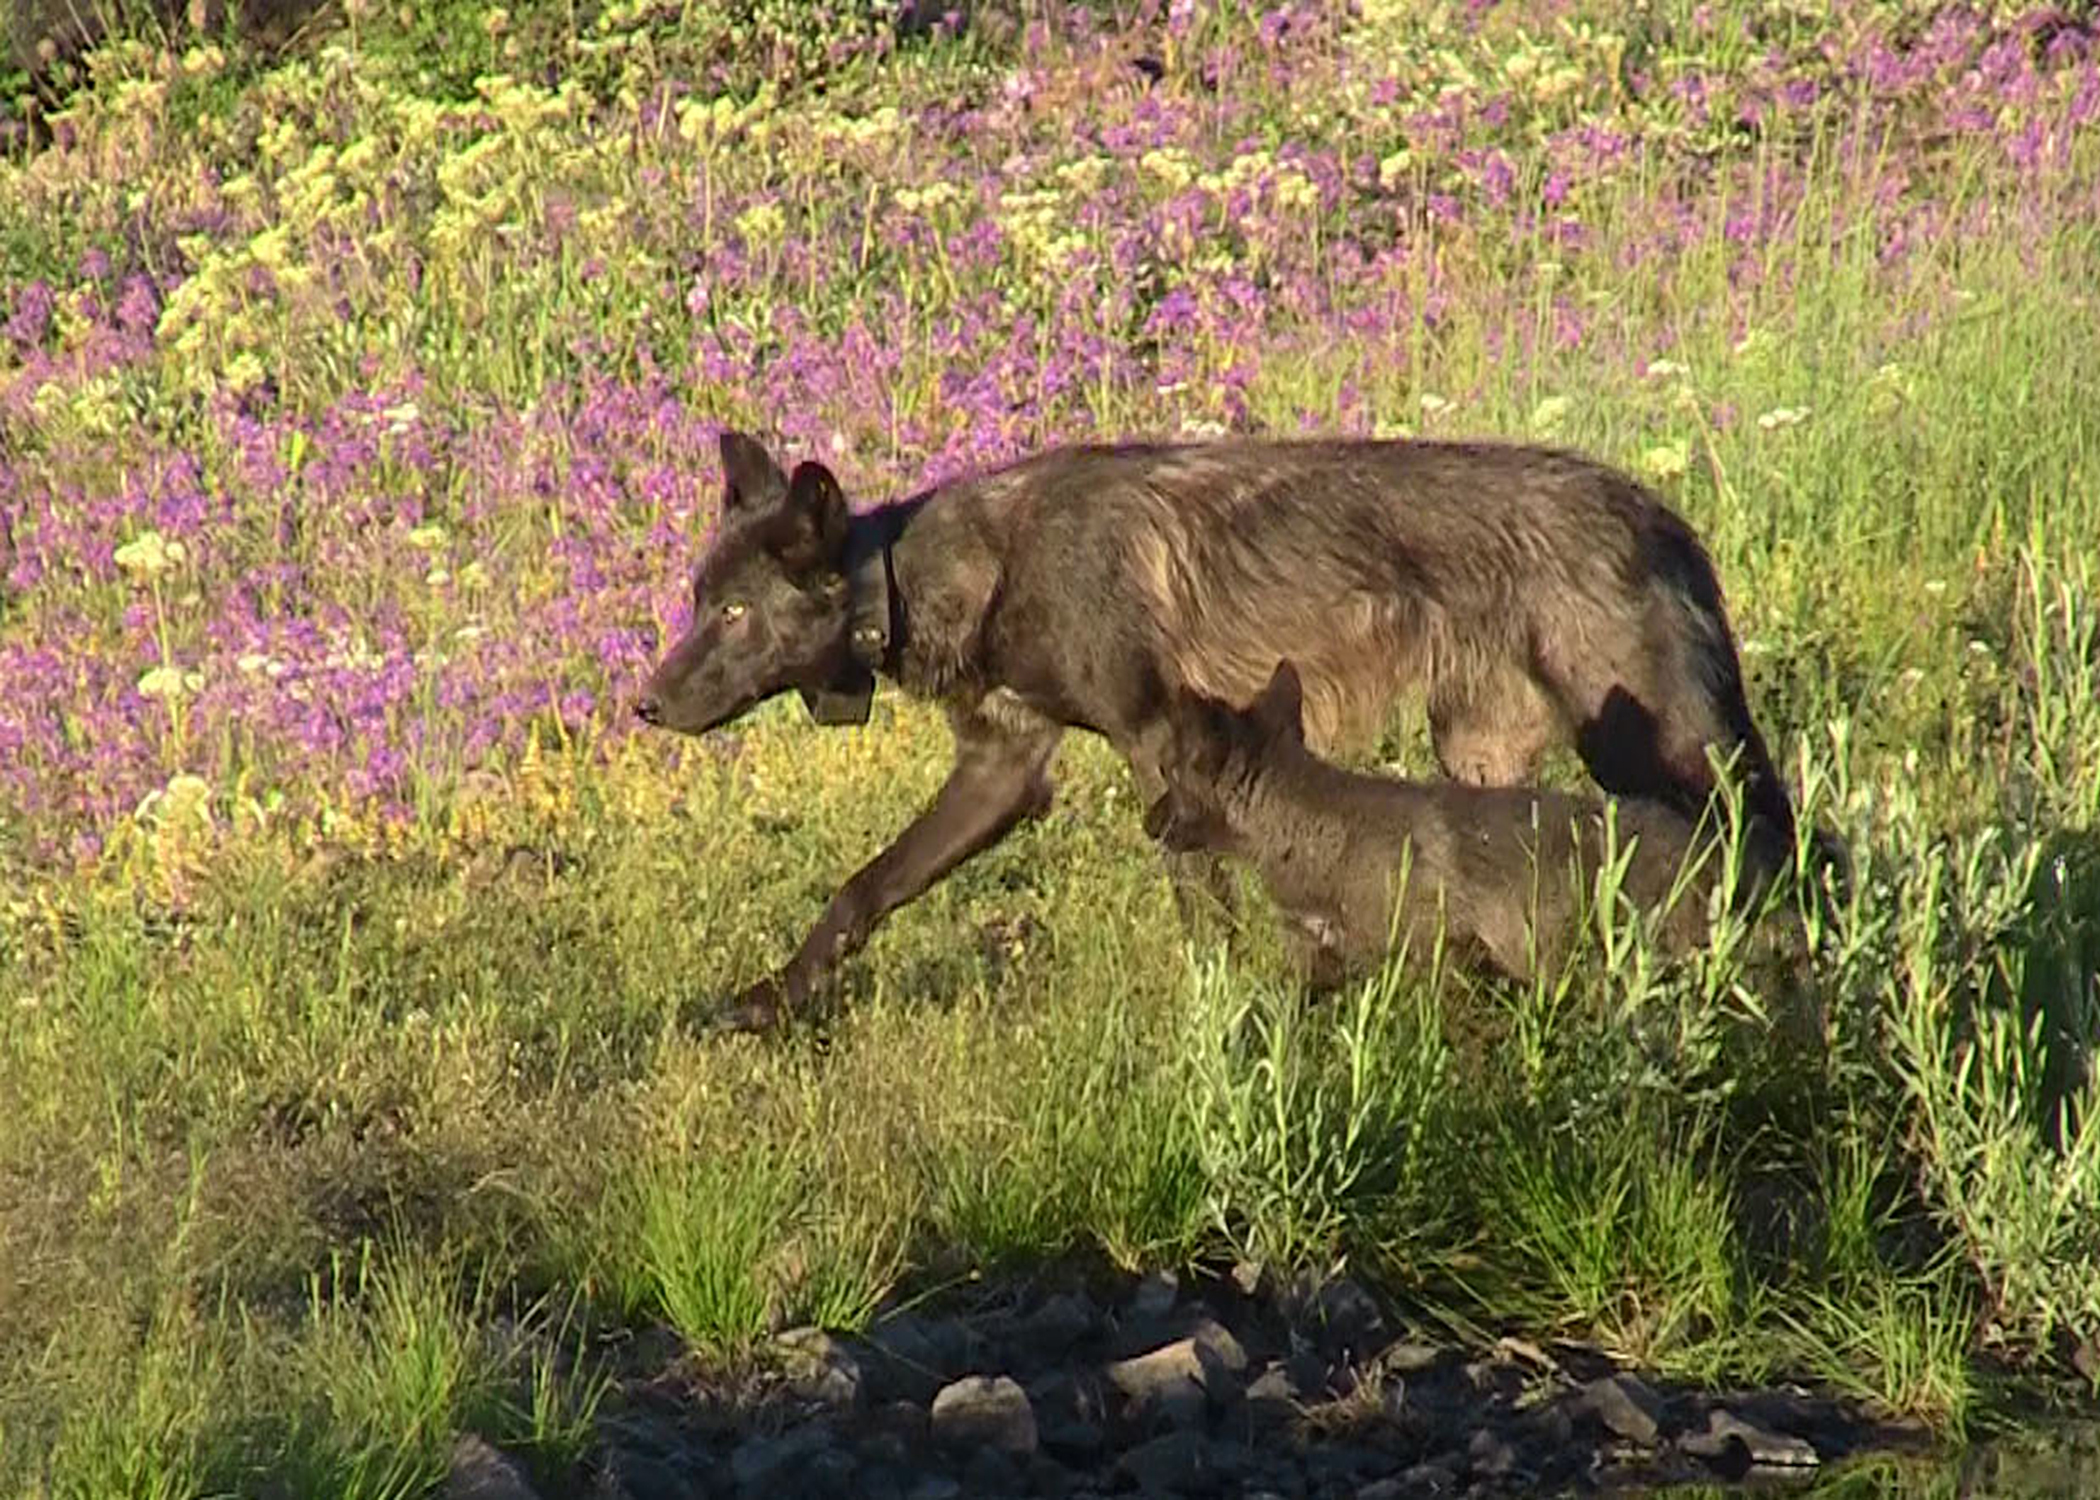 Photo taken July 6 2013 of OR17 with a 2013 pup of the Imnaha pack. Subadult wolves assist in the raising of the pups. Photo courtesy of ODFW